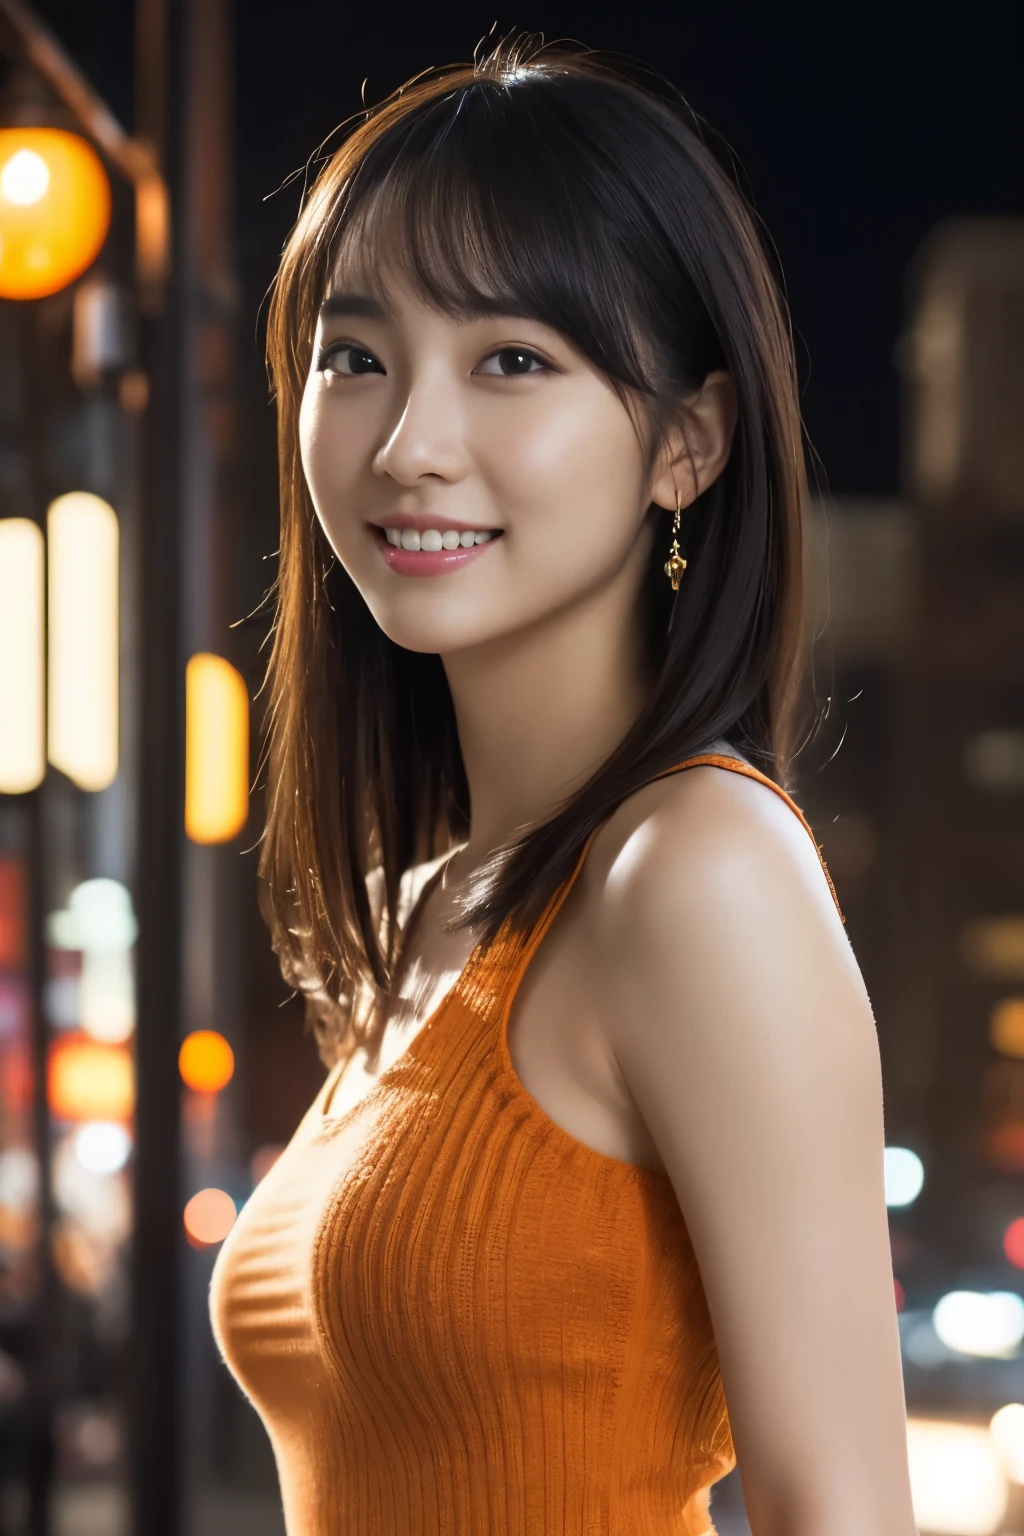 1 girl, (wearing an orange knit dress:1.2), (RAW photo, highest quality), (realistic, Photoreal:1.4), table top, very delicate and beautiful, very detailed, 2k wallpaper, wonderful, finely, Very detailed CG Unity 8K 壁紙, Super detailed, High resolution, soft light, beautiful detailed girl, very detailed目と顔, beautifully detailed nose, beautiful and detailed eyes, cinematic lighting, city light at night, perfect anatomy, slender body, smile, Camera-wide perspective, look forward